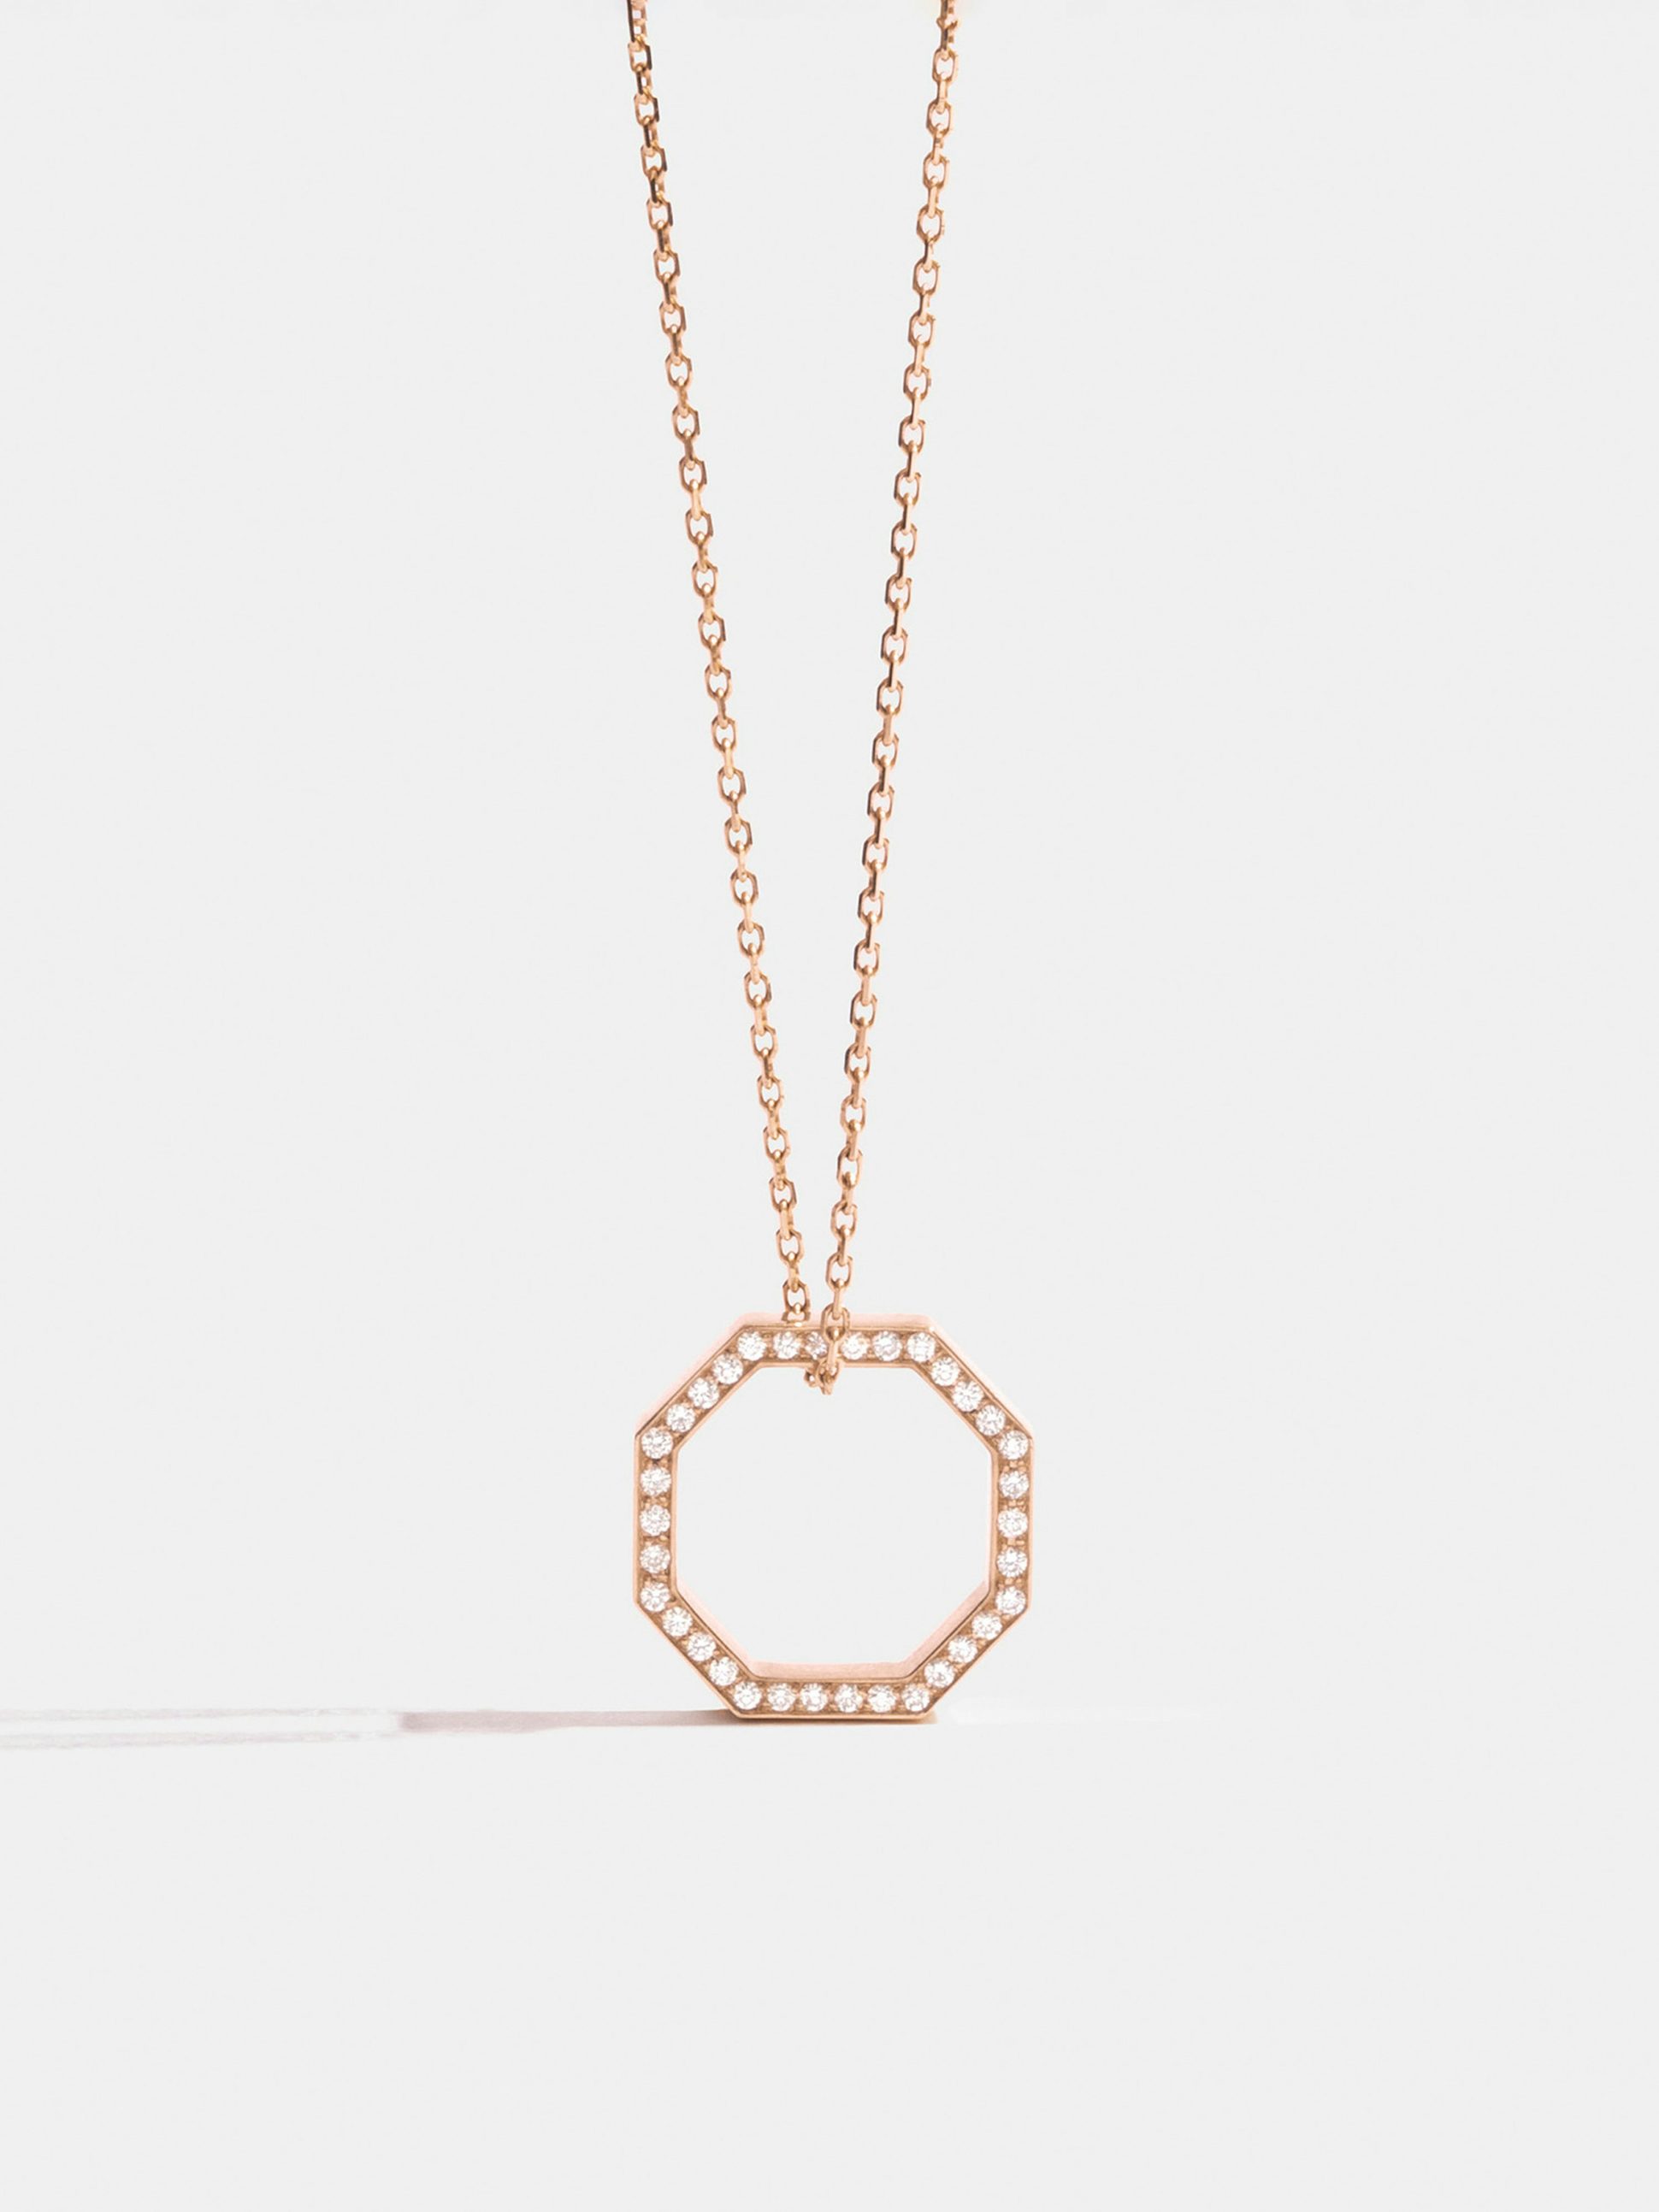 Octogone 14mm pendant in 18k Fairmined ethical rose gold, paved with lab-grown diamonds, on a chain.